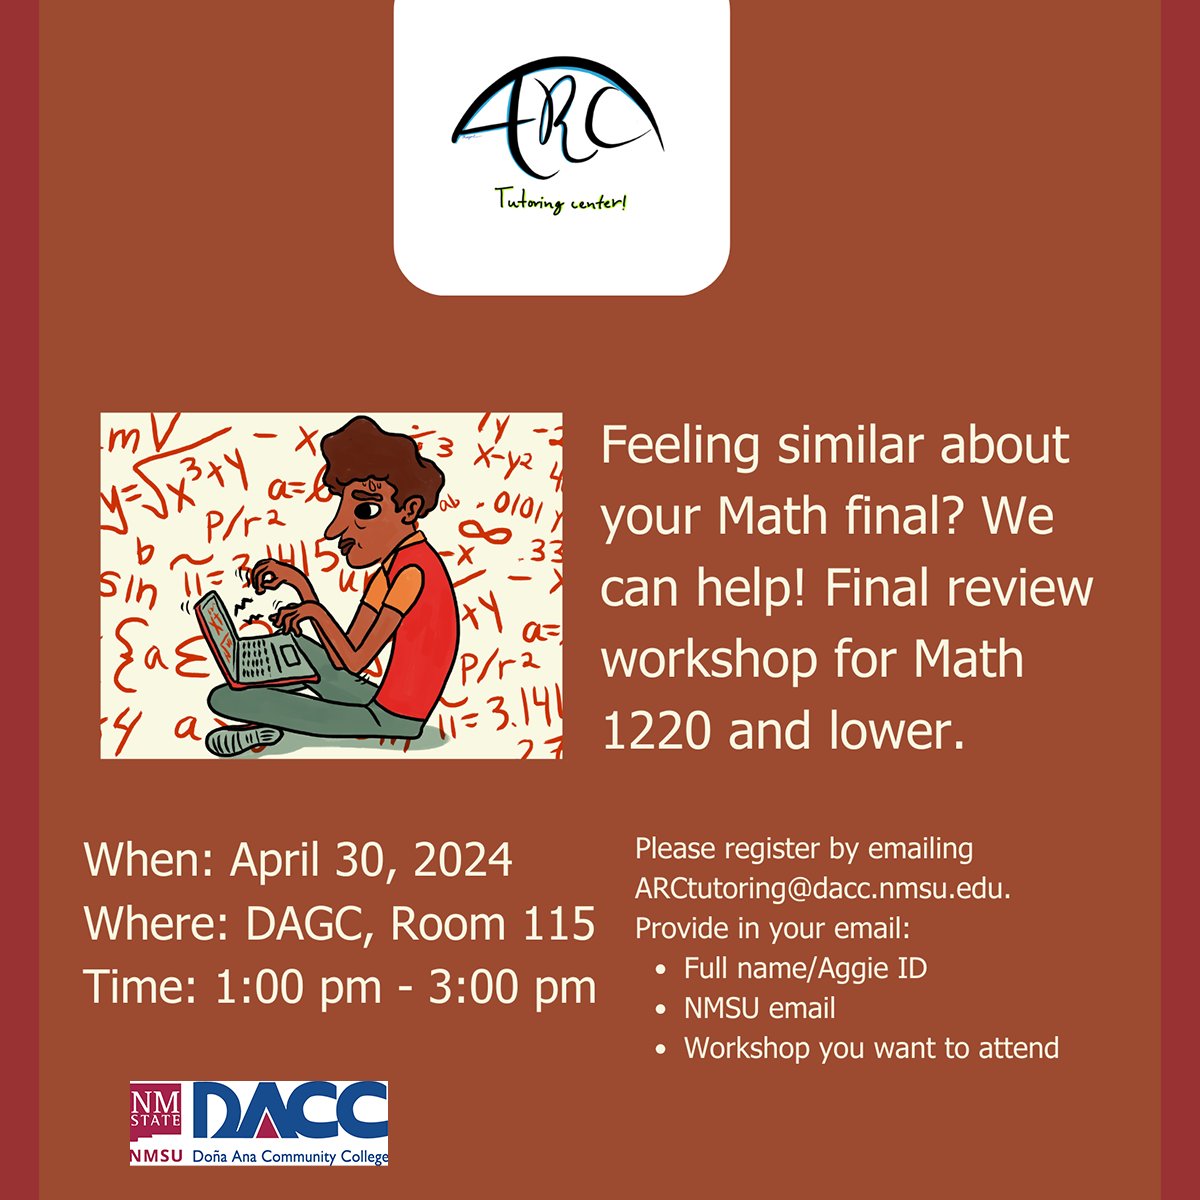 Feeling jumbled about your Math final? Come to our final review workshop for Math 1220 and lower. DACC Gadsden Center Rm. 115. Please email ARCtutoring@dacc.nmsu.edu to register including full name, Aggie ID, NMSU email and the name of the workshop you want to attend. #WeAreDACC